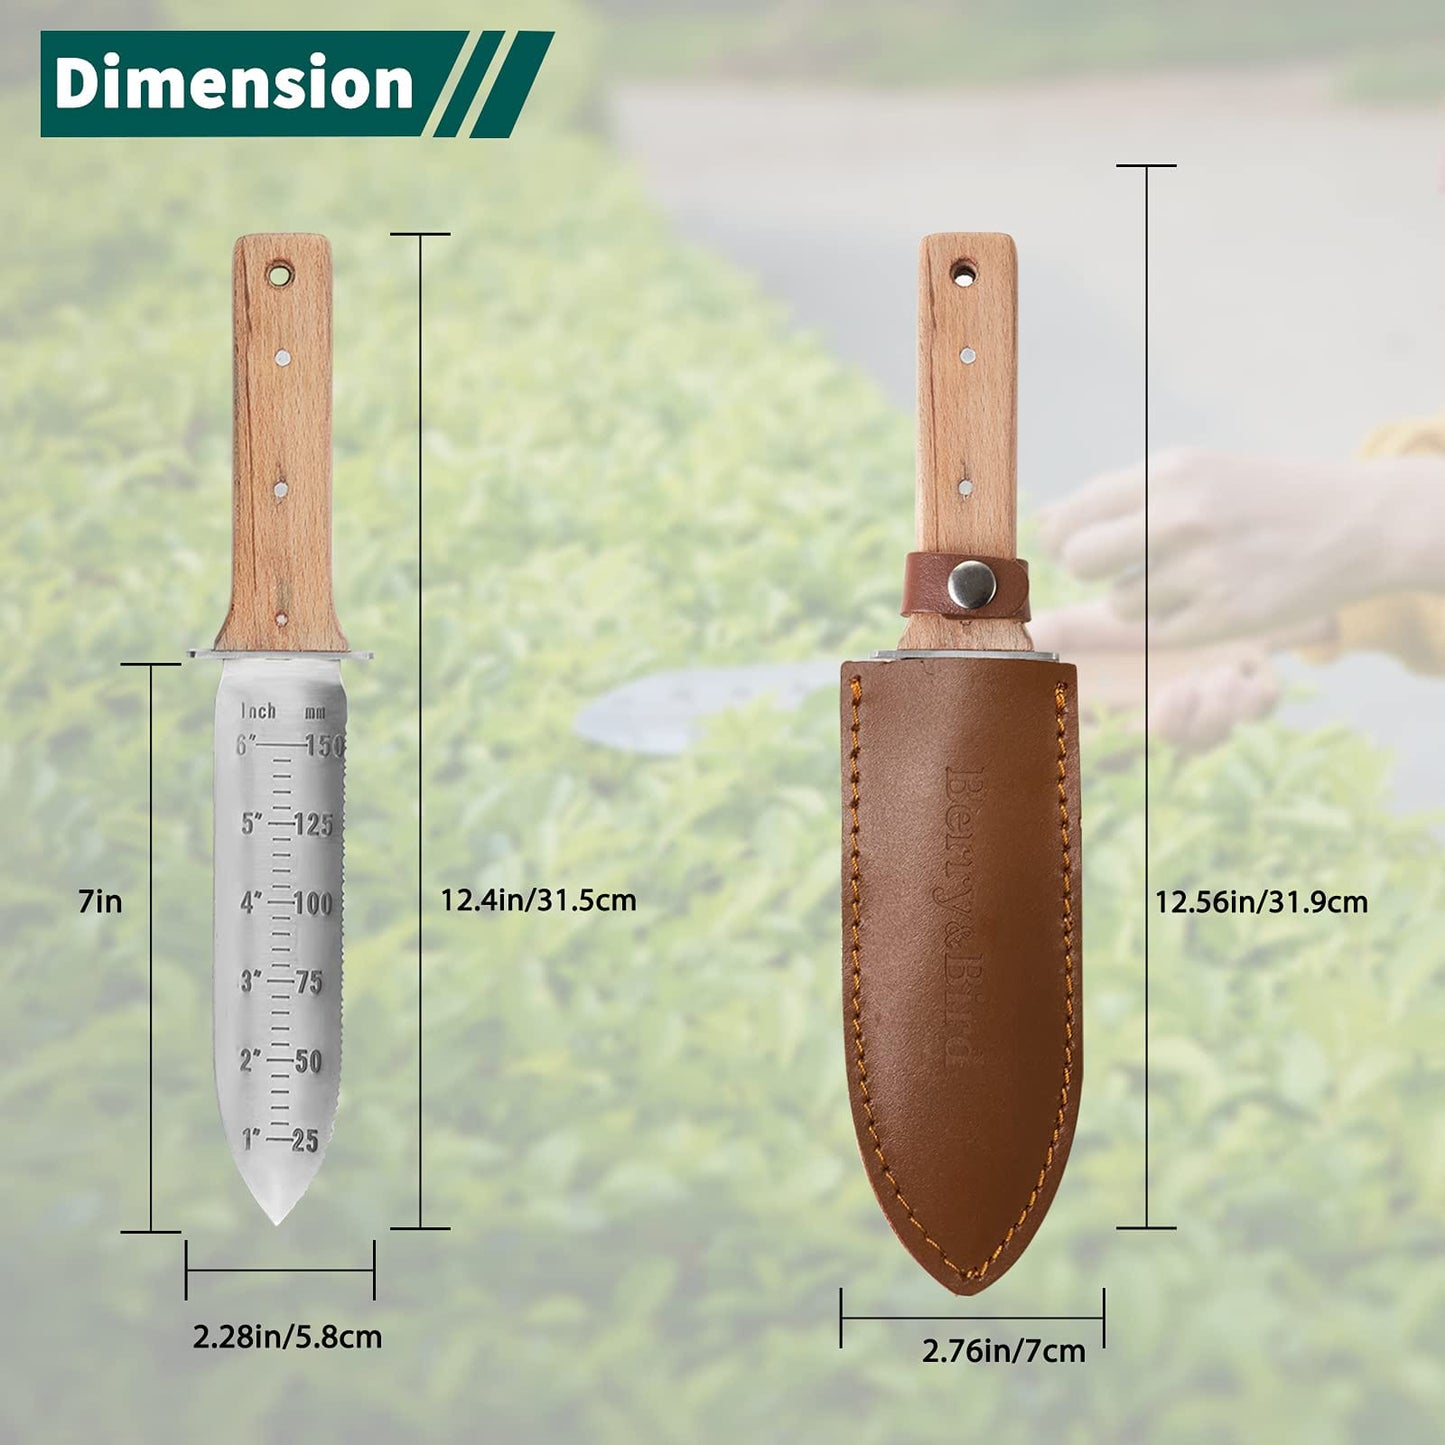 Garden Knife 7 inch Stainless Steel Serrated Blade with Leather Sheath and Sharpening Stone